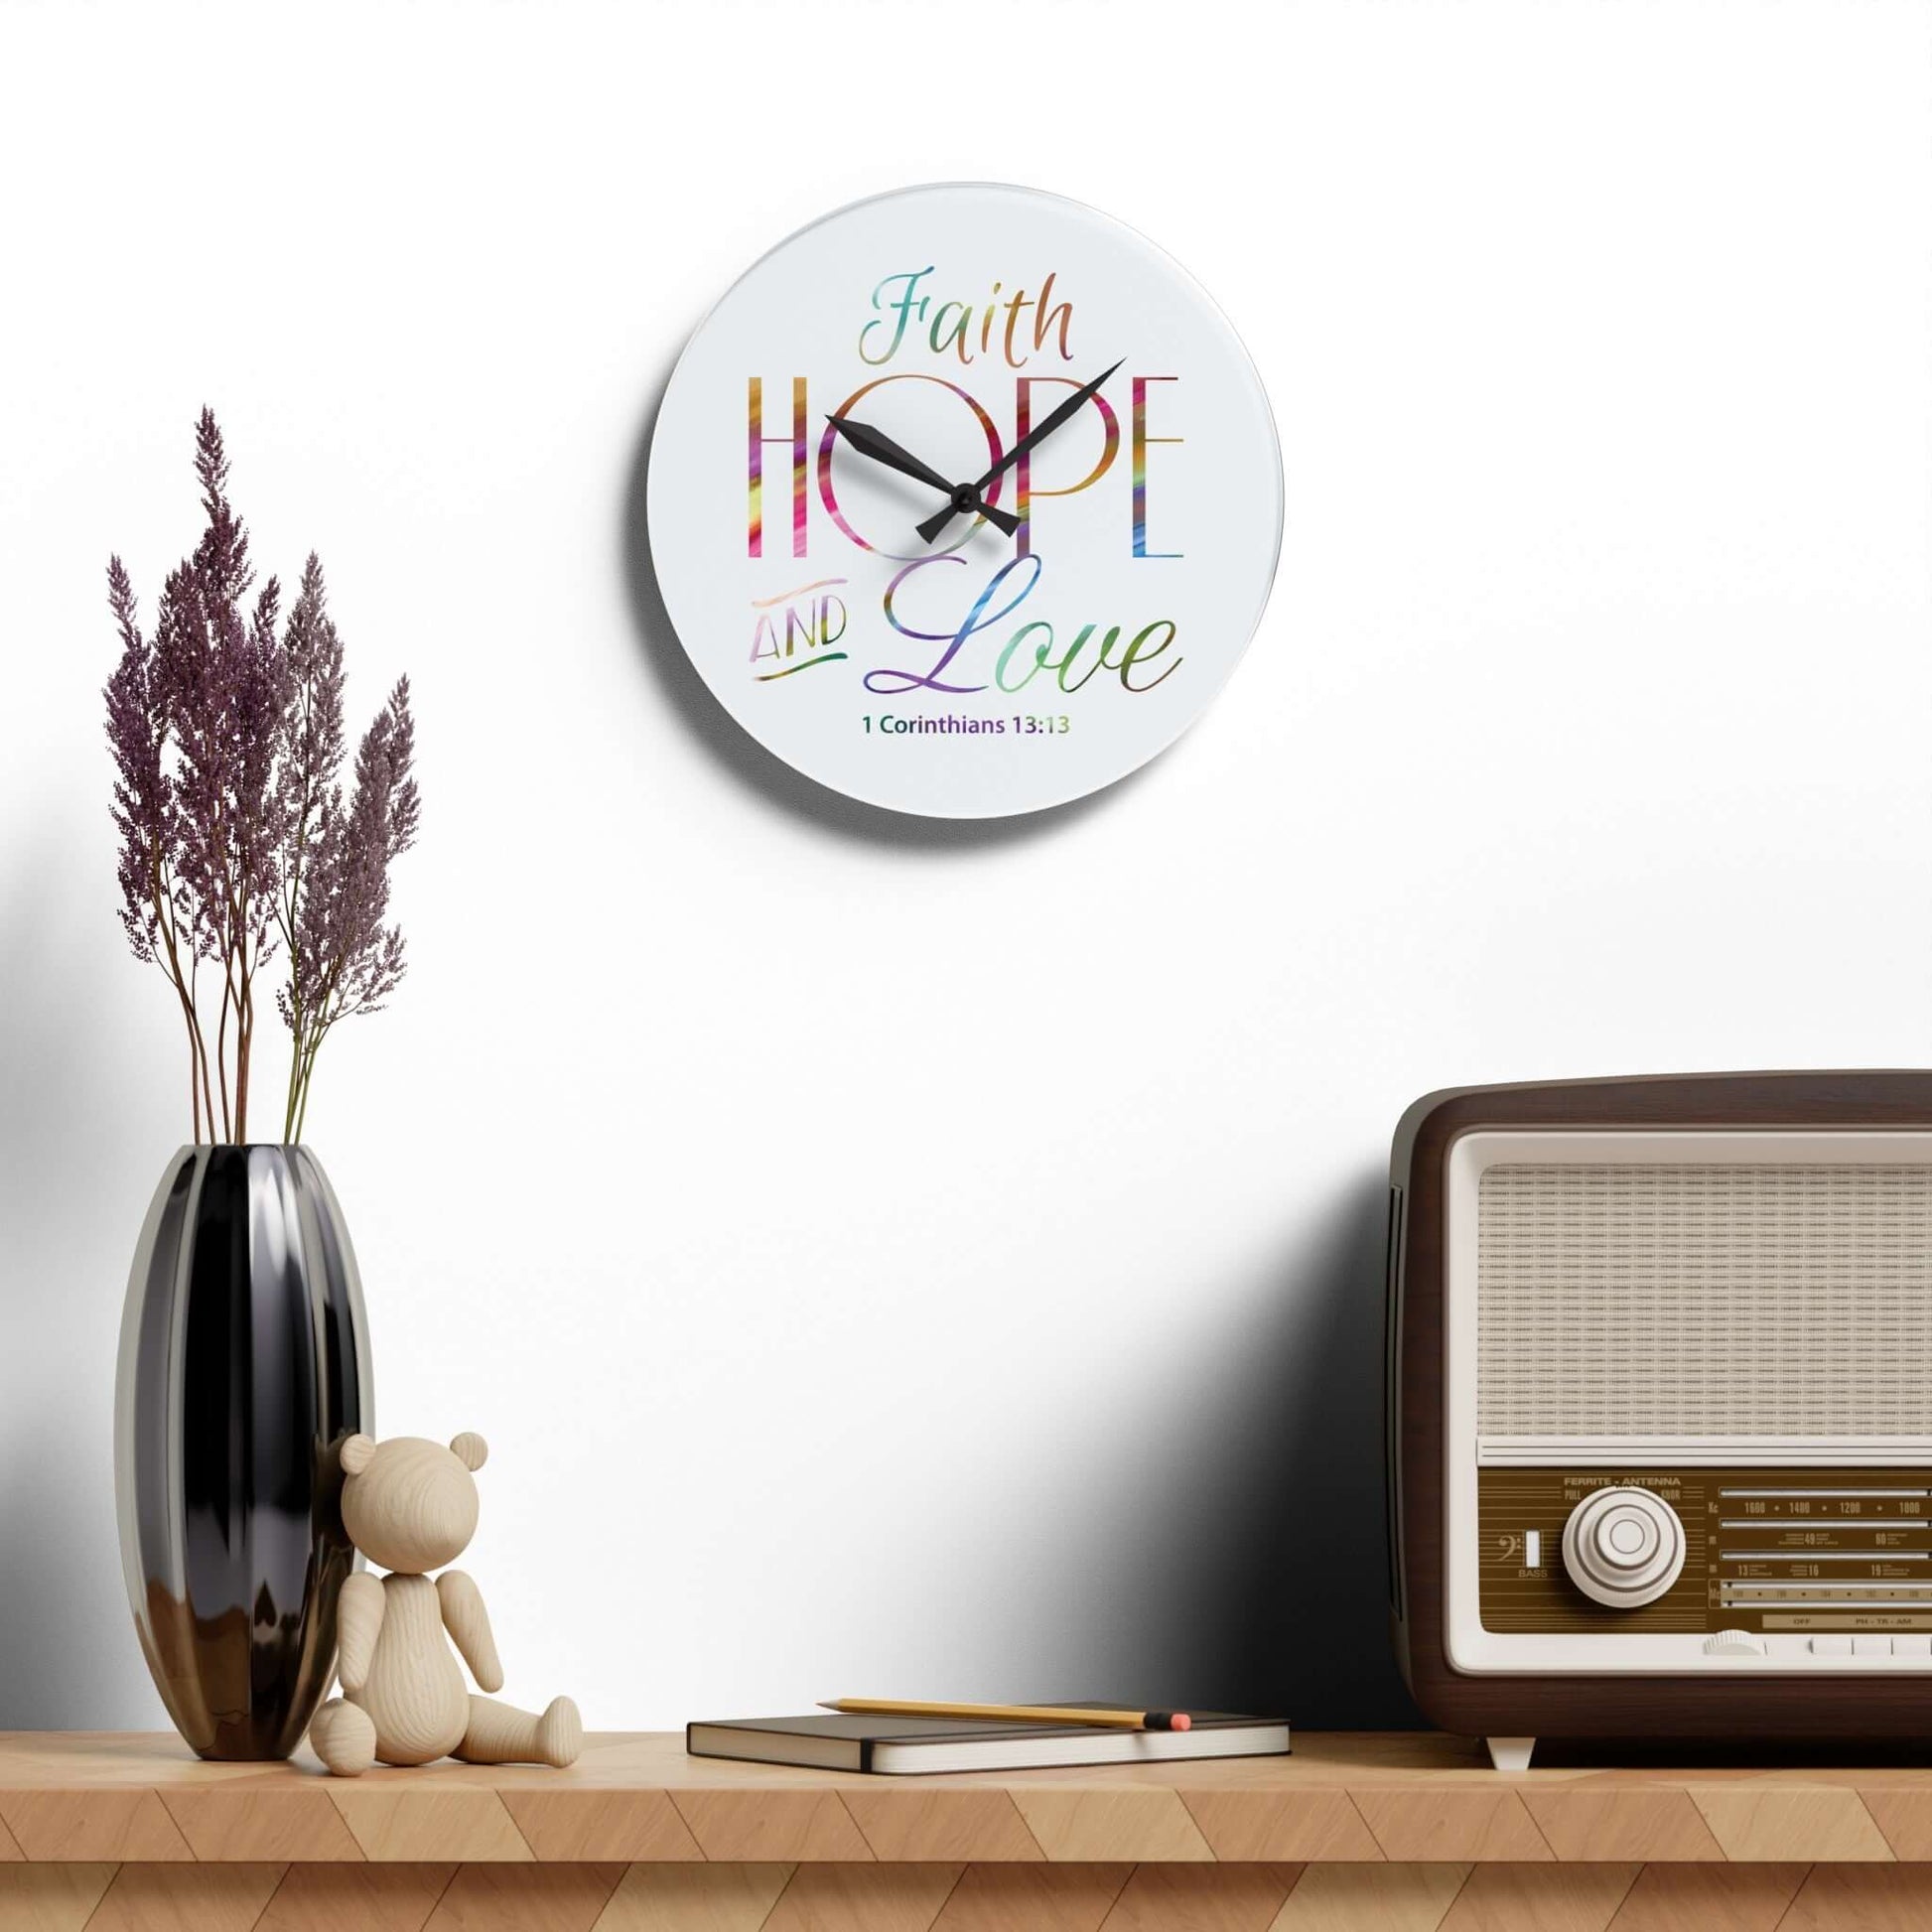 Unique Wall Clocks Large - Durable Acrylic Wall Clocks in Round & Square | Art & Wall Decor,Back-to-School,Clocks,Decor,Home & Living,Home Decor,Indoor